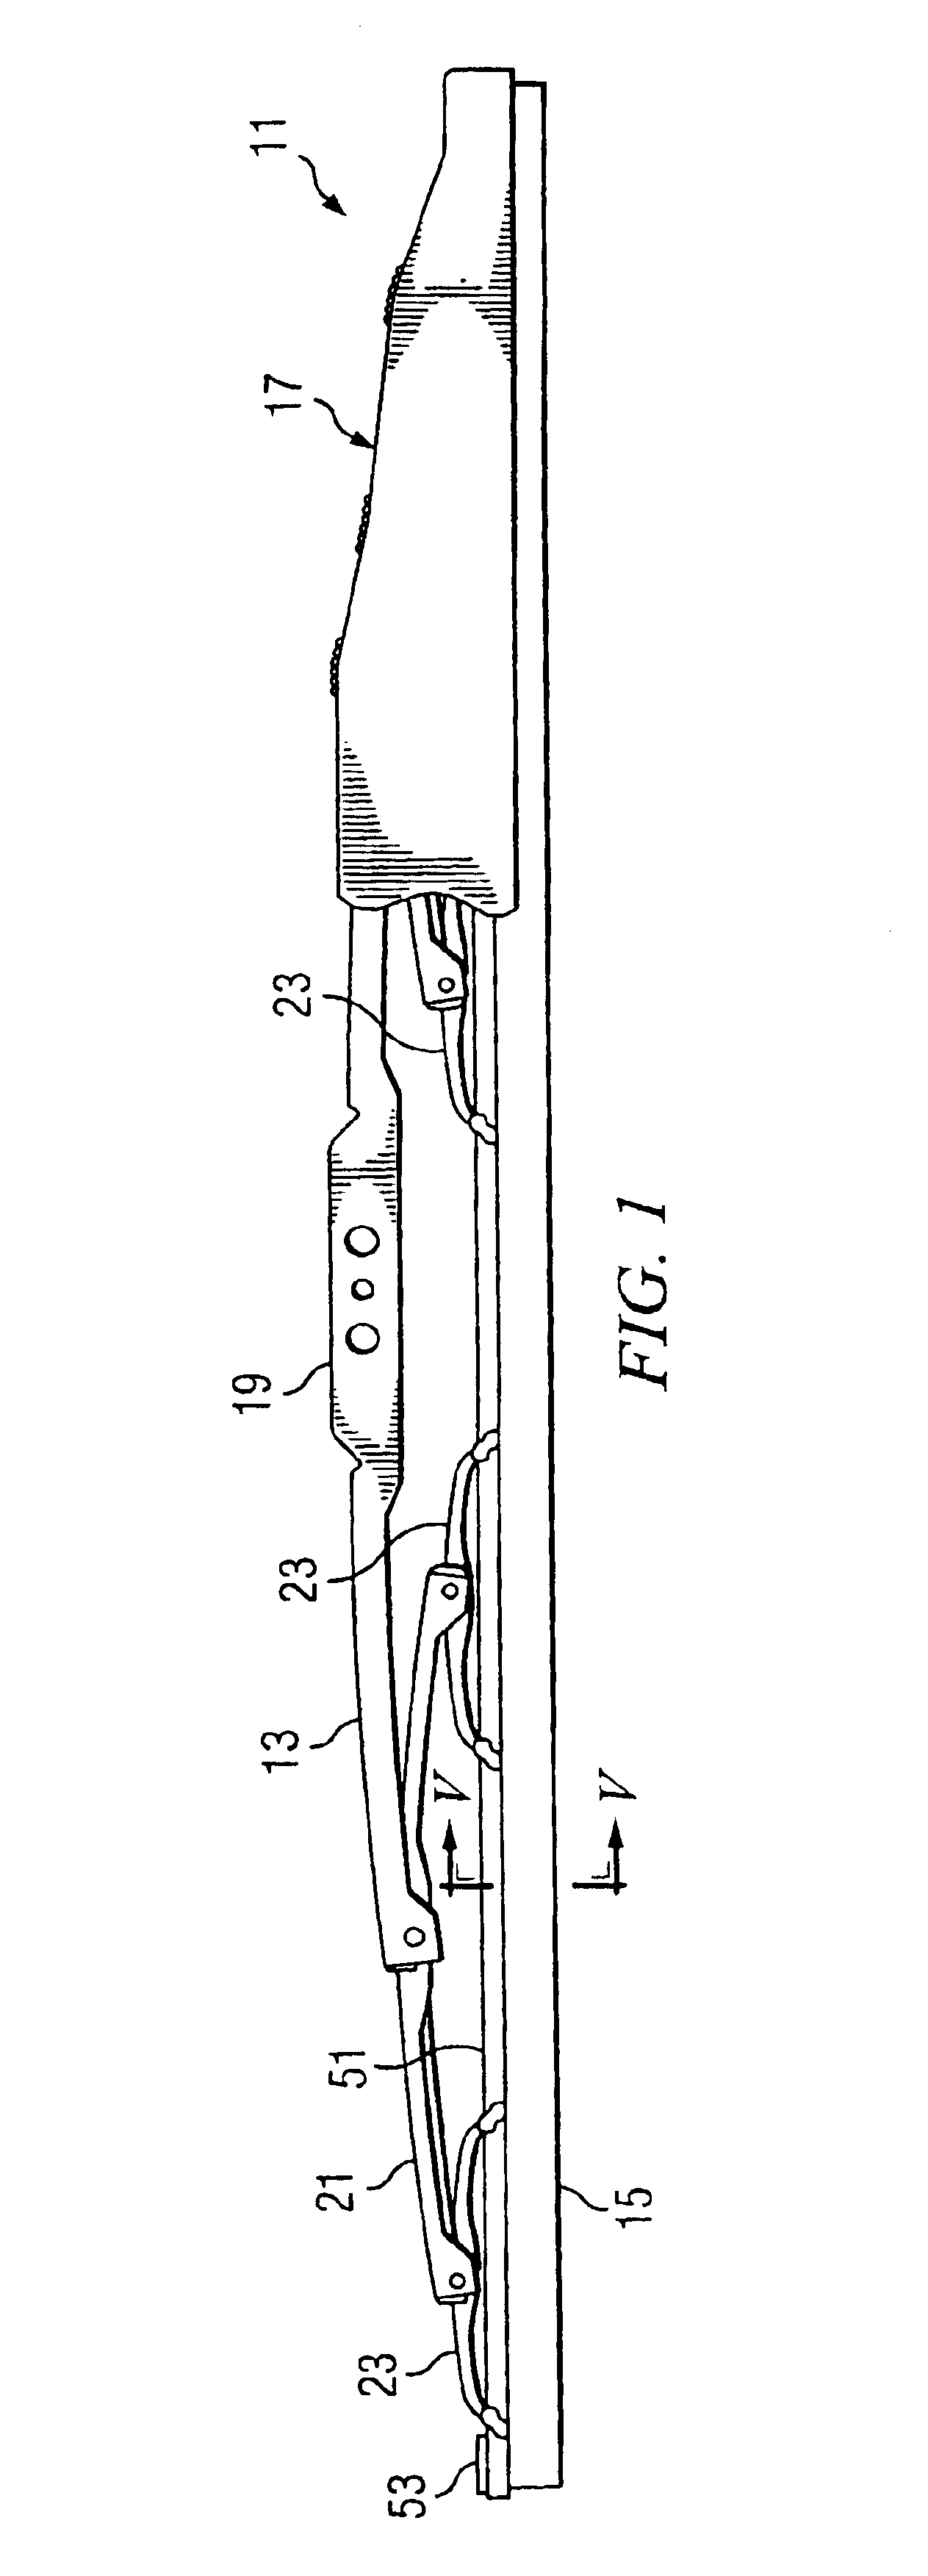 Windshield wiper assembly having a winter boot